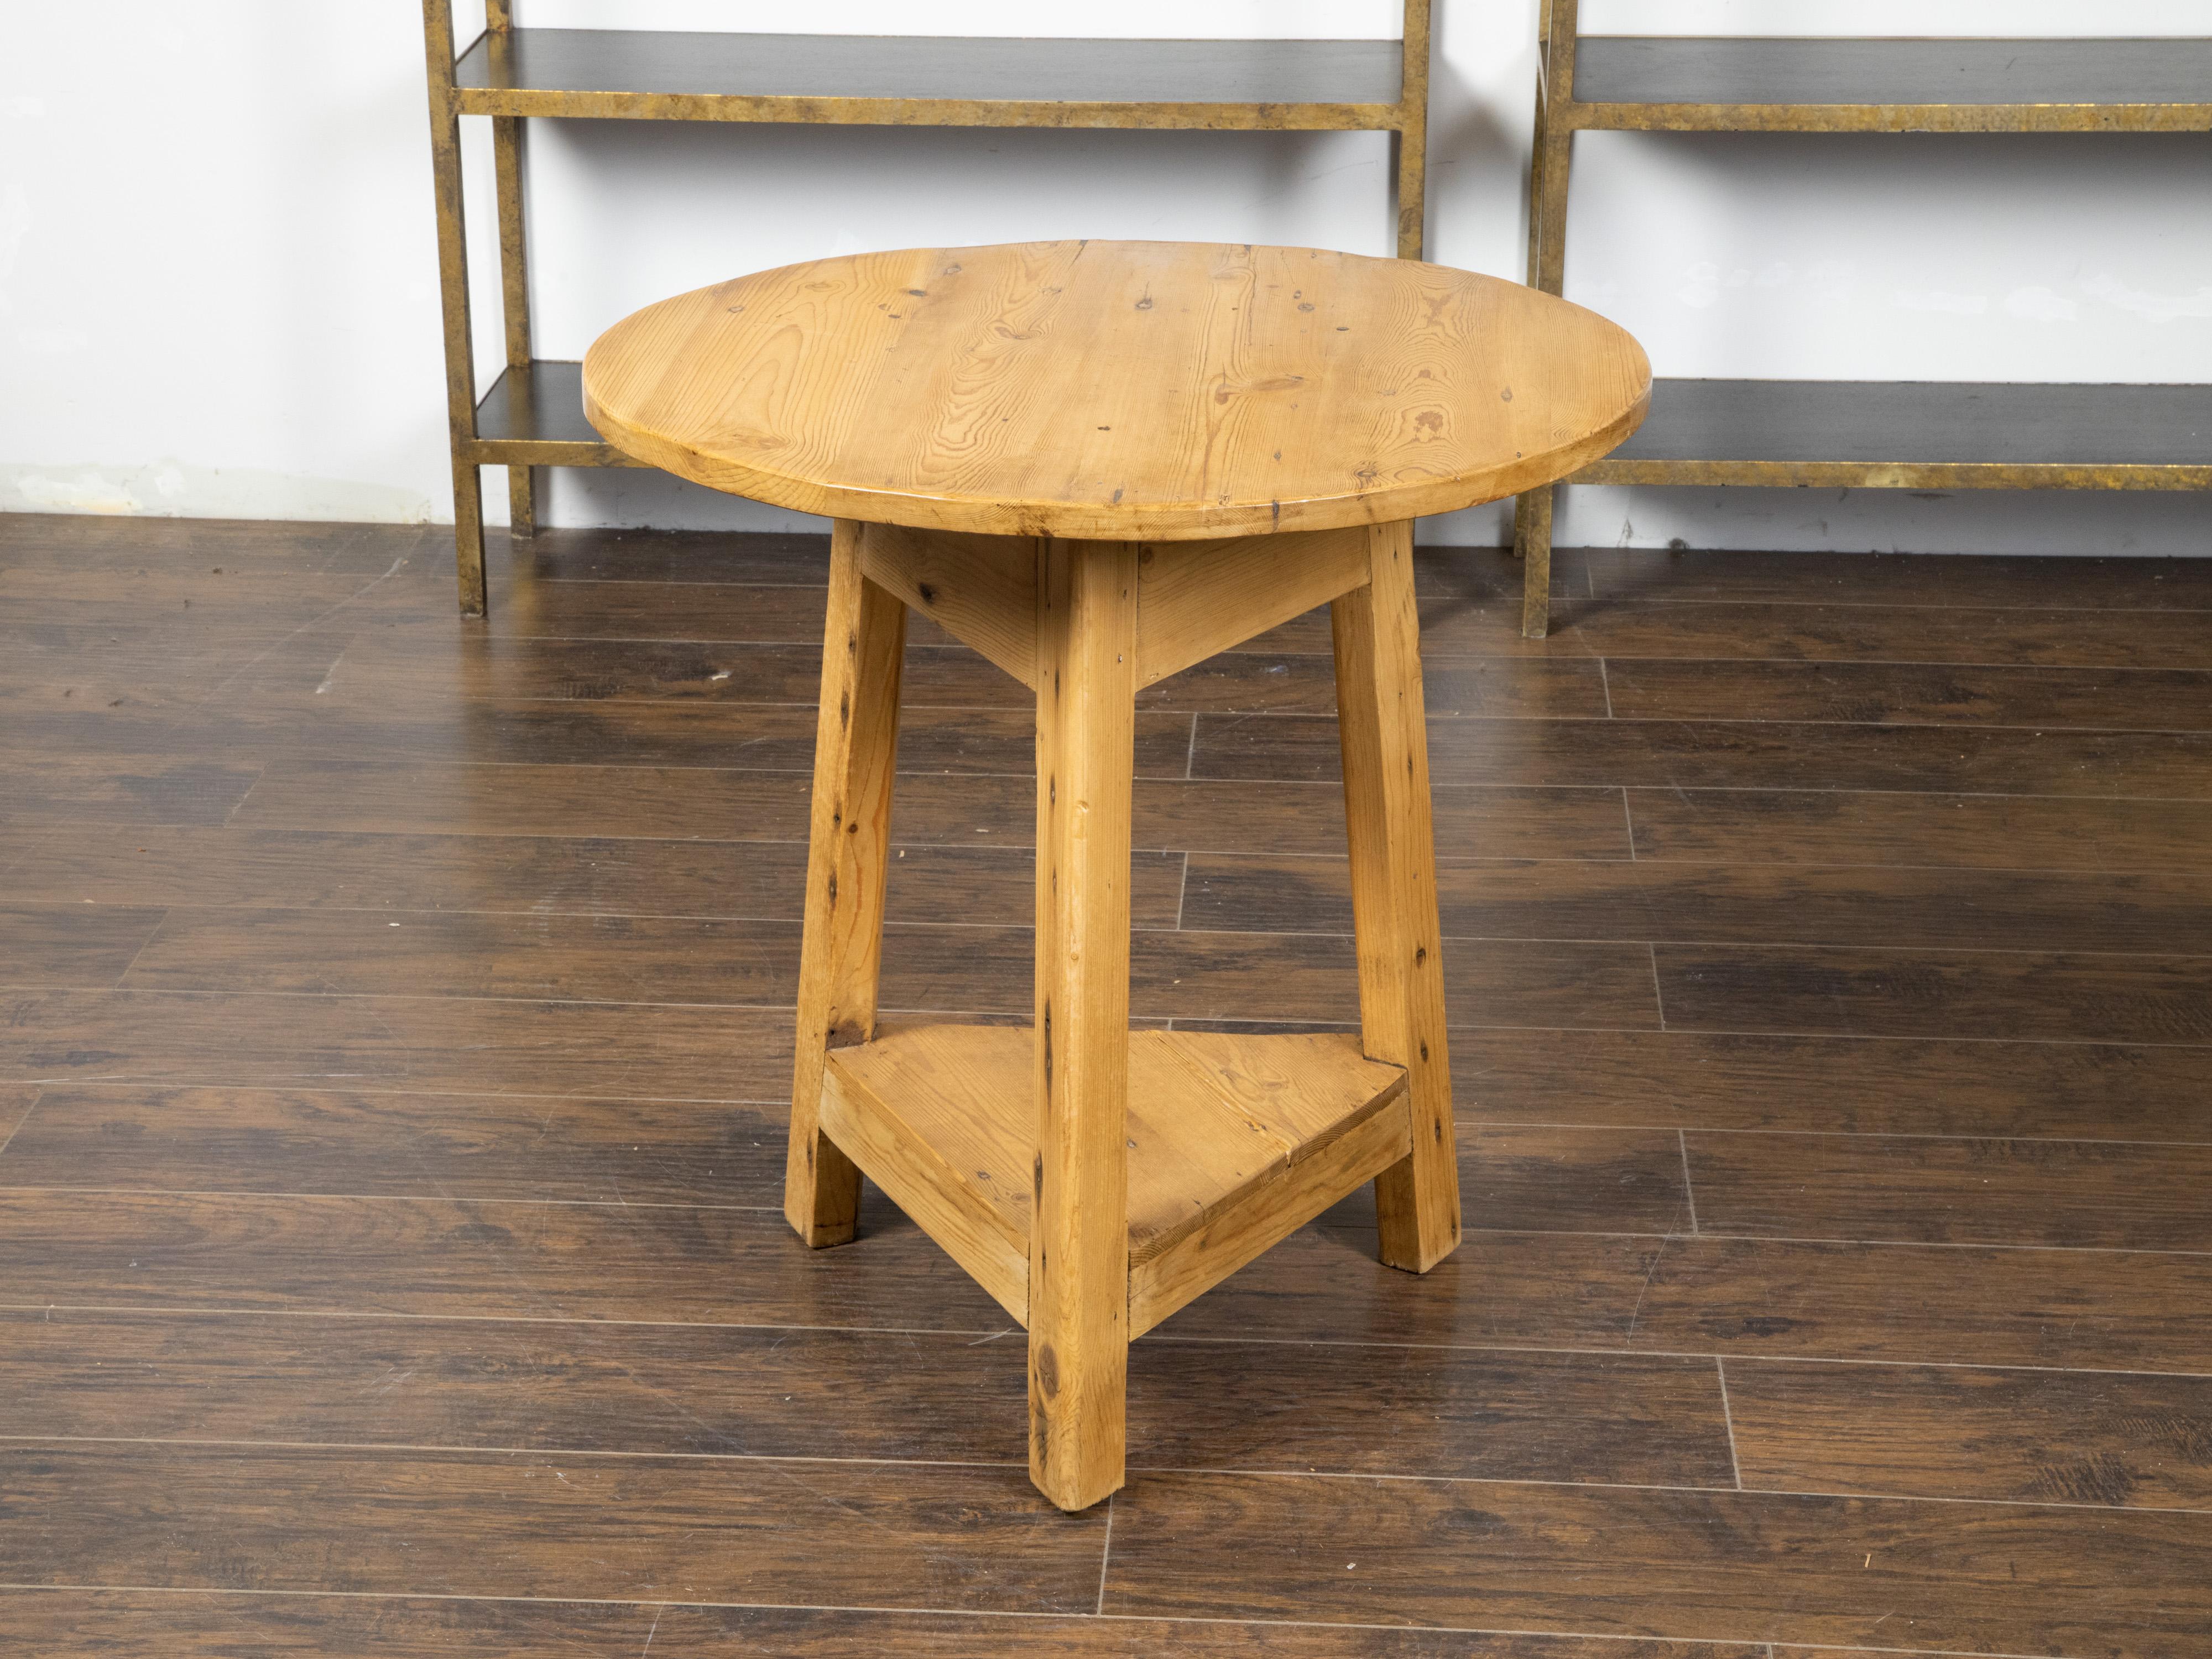 An English rustic pine cricket table from the 19th century, with circular top and triangular shelf. Created in England during the 19th century, this rustic cricket side table features a circular top, sitting above a simple triangular apron. The